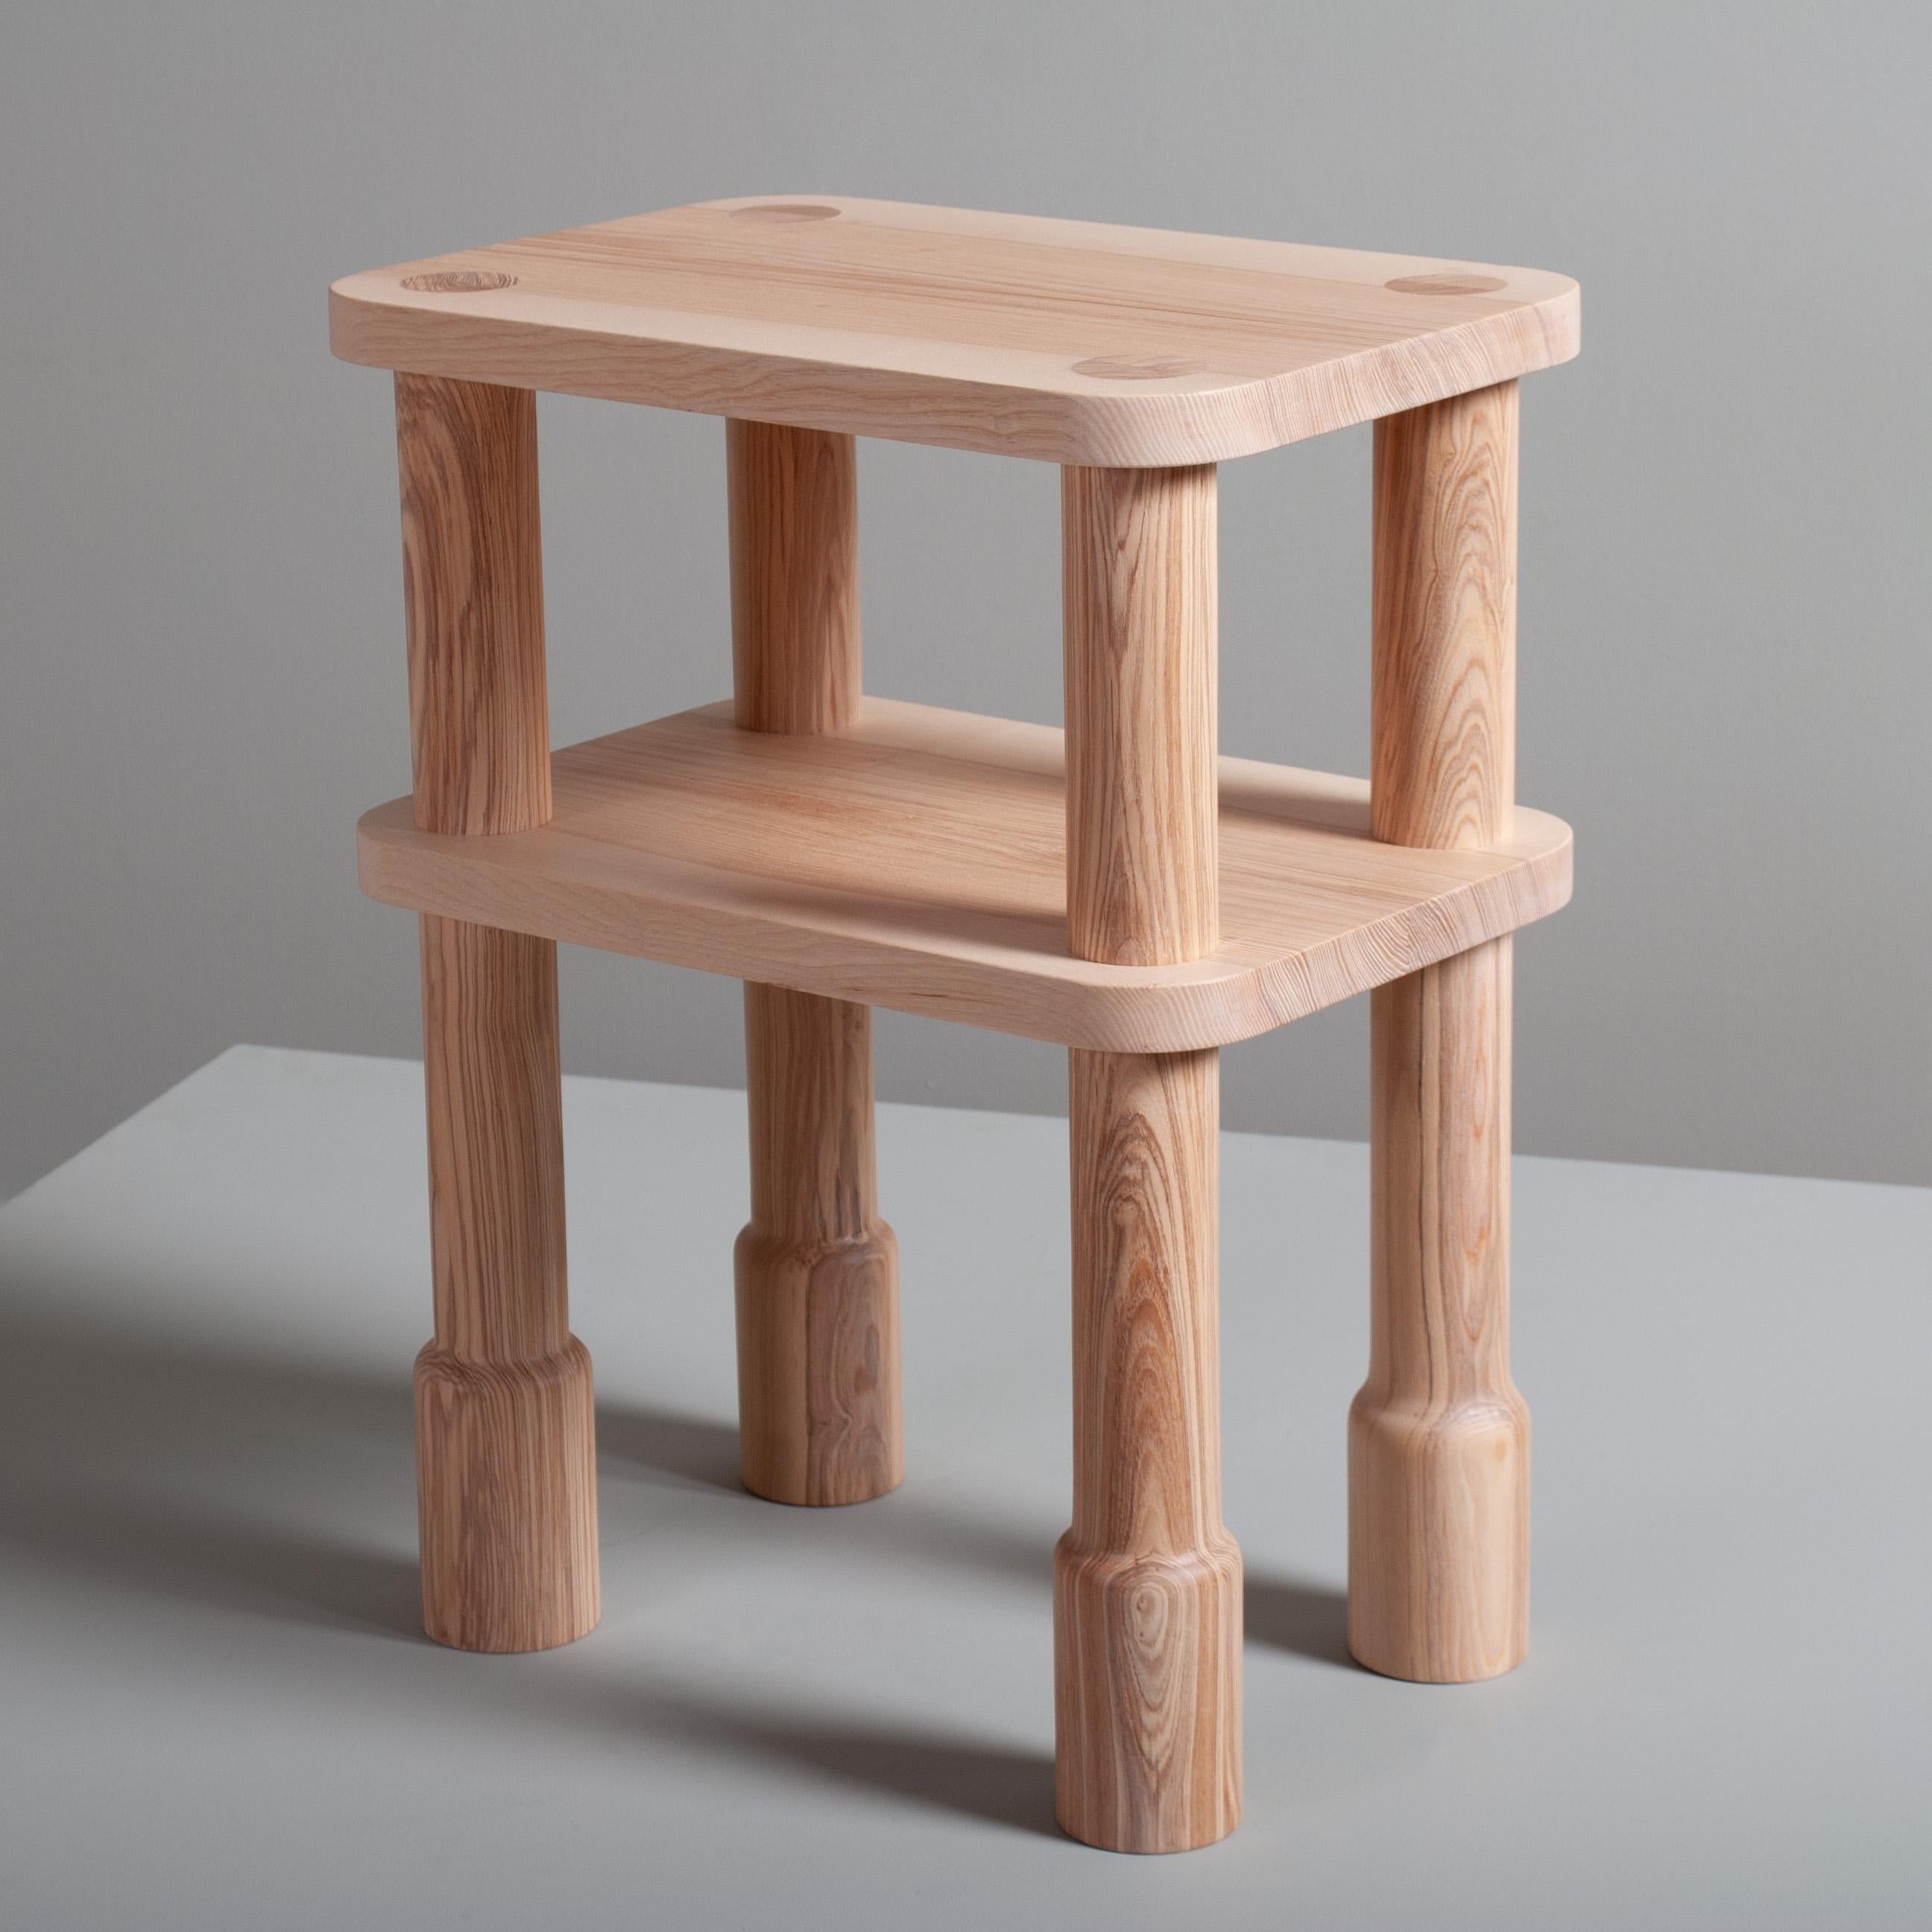 A pair of hand-crafted and turned English ash Maunsell end tables. 
These are bespoke pieces of fine quality, handmade by our master craftsman in solid English ash. Finished in durable Osmo oil.
Custom dimensions are available upon request. Also